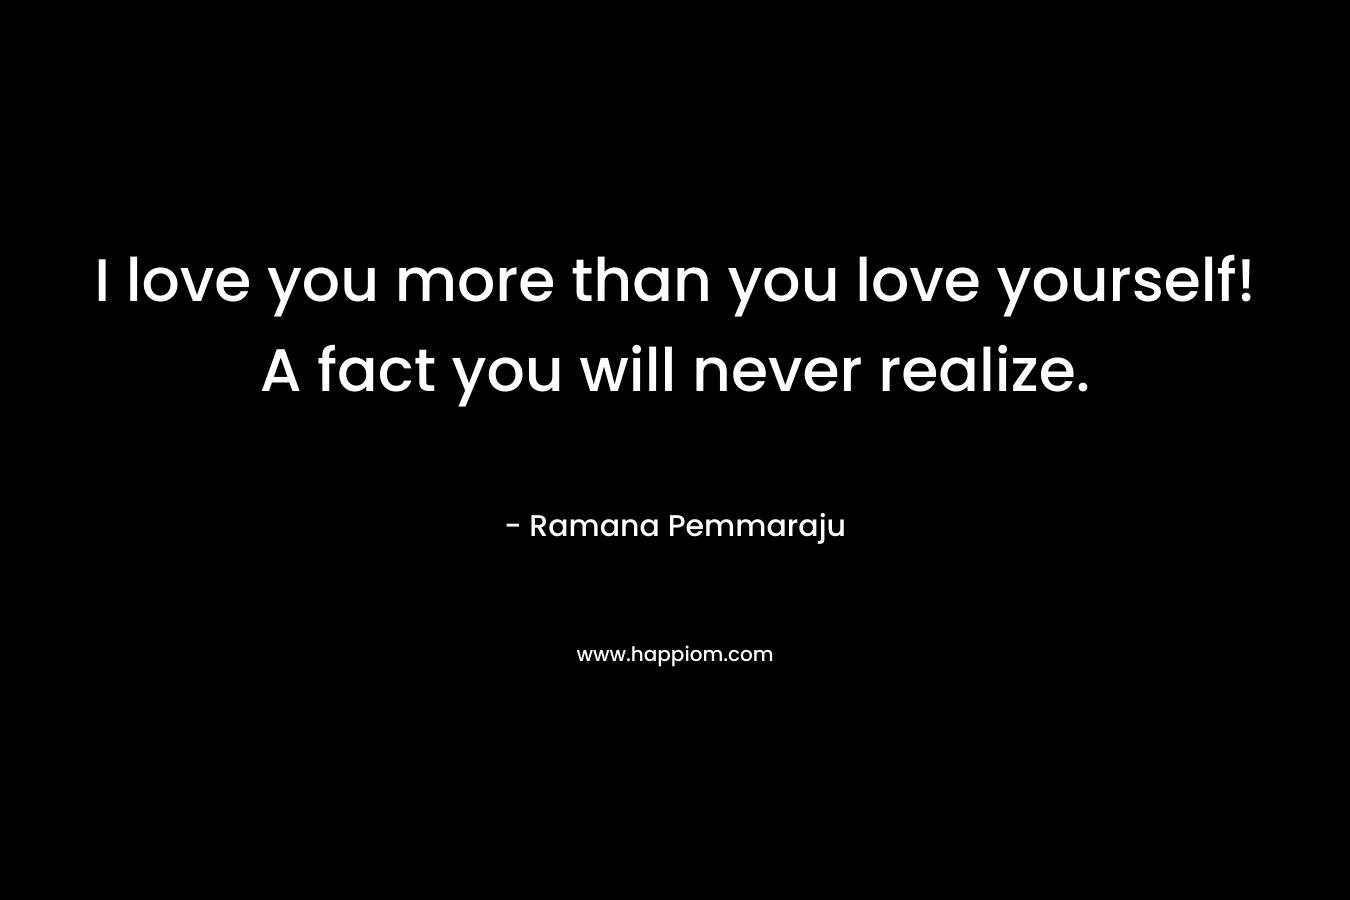 I love you more than you love yourself! A fact you will never realize.